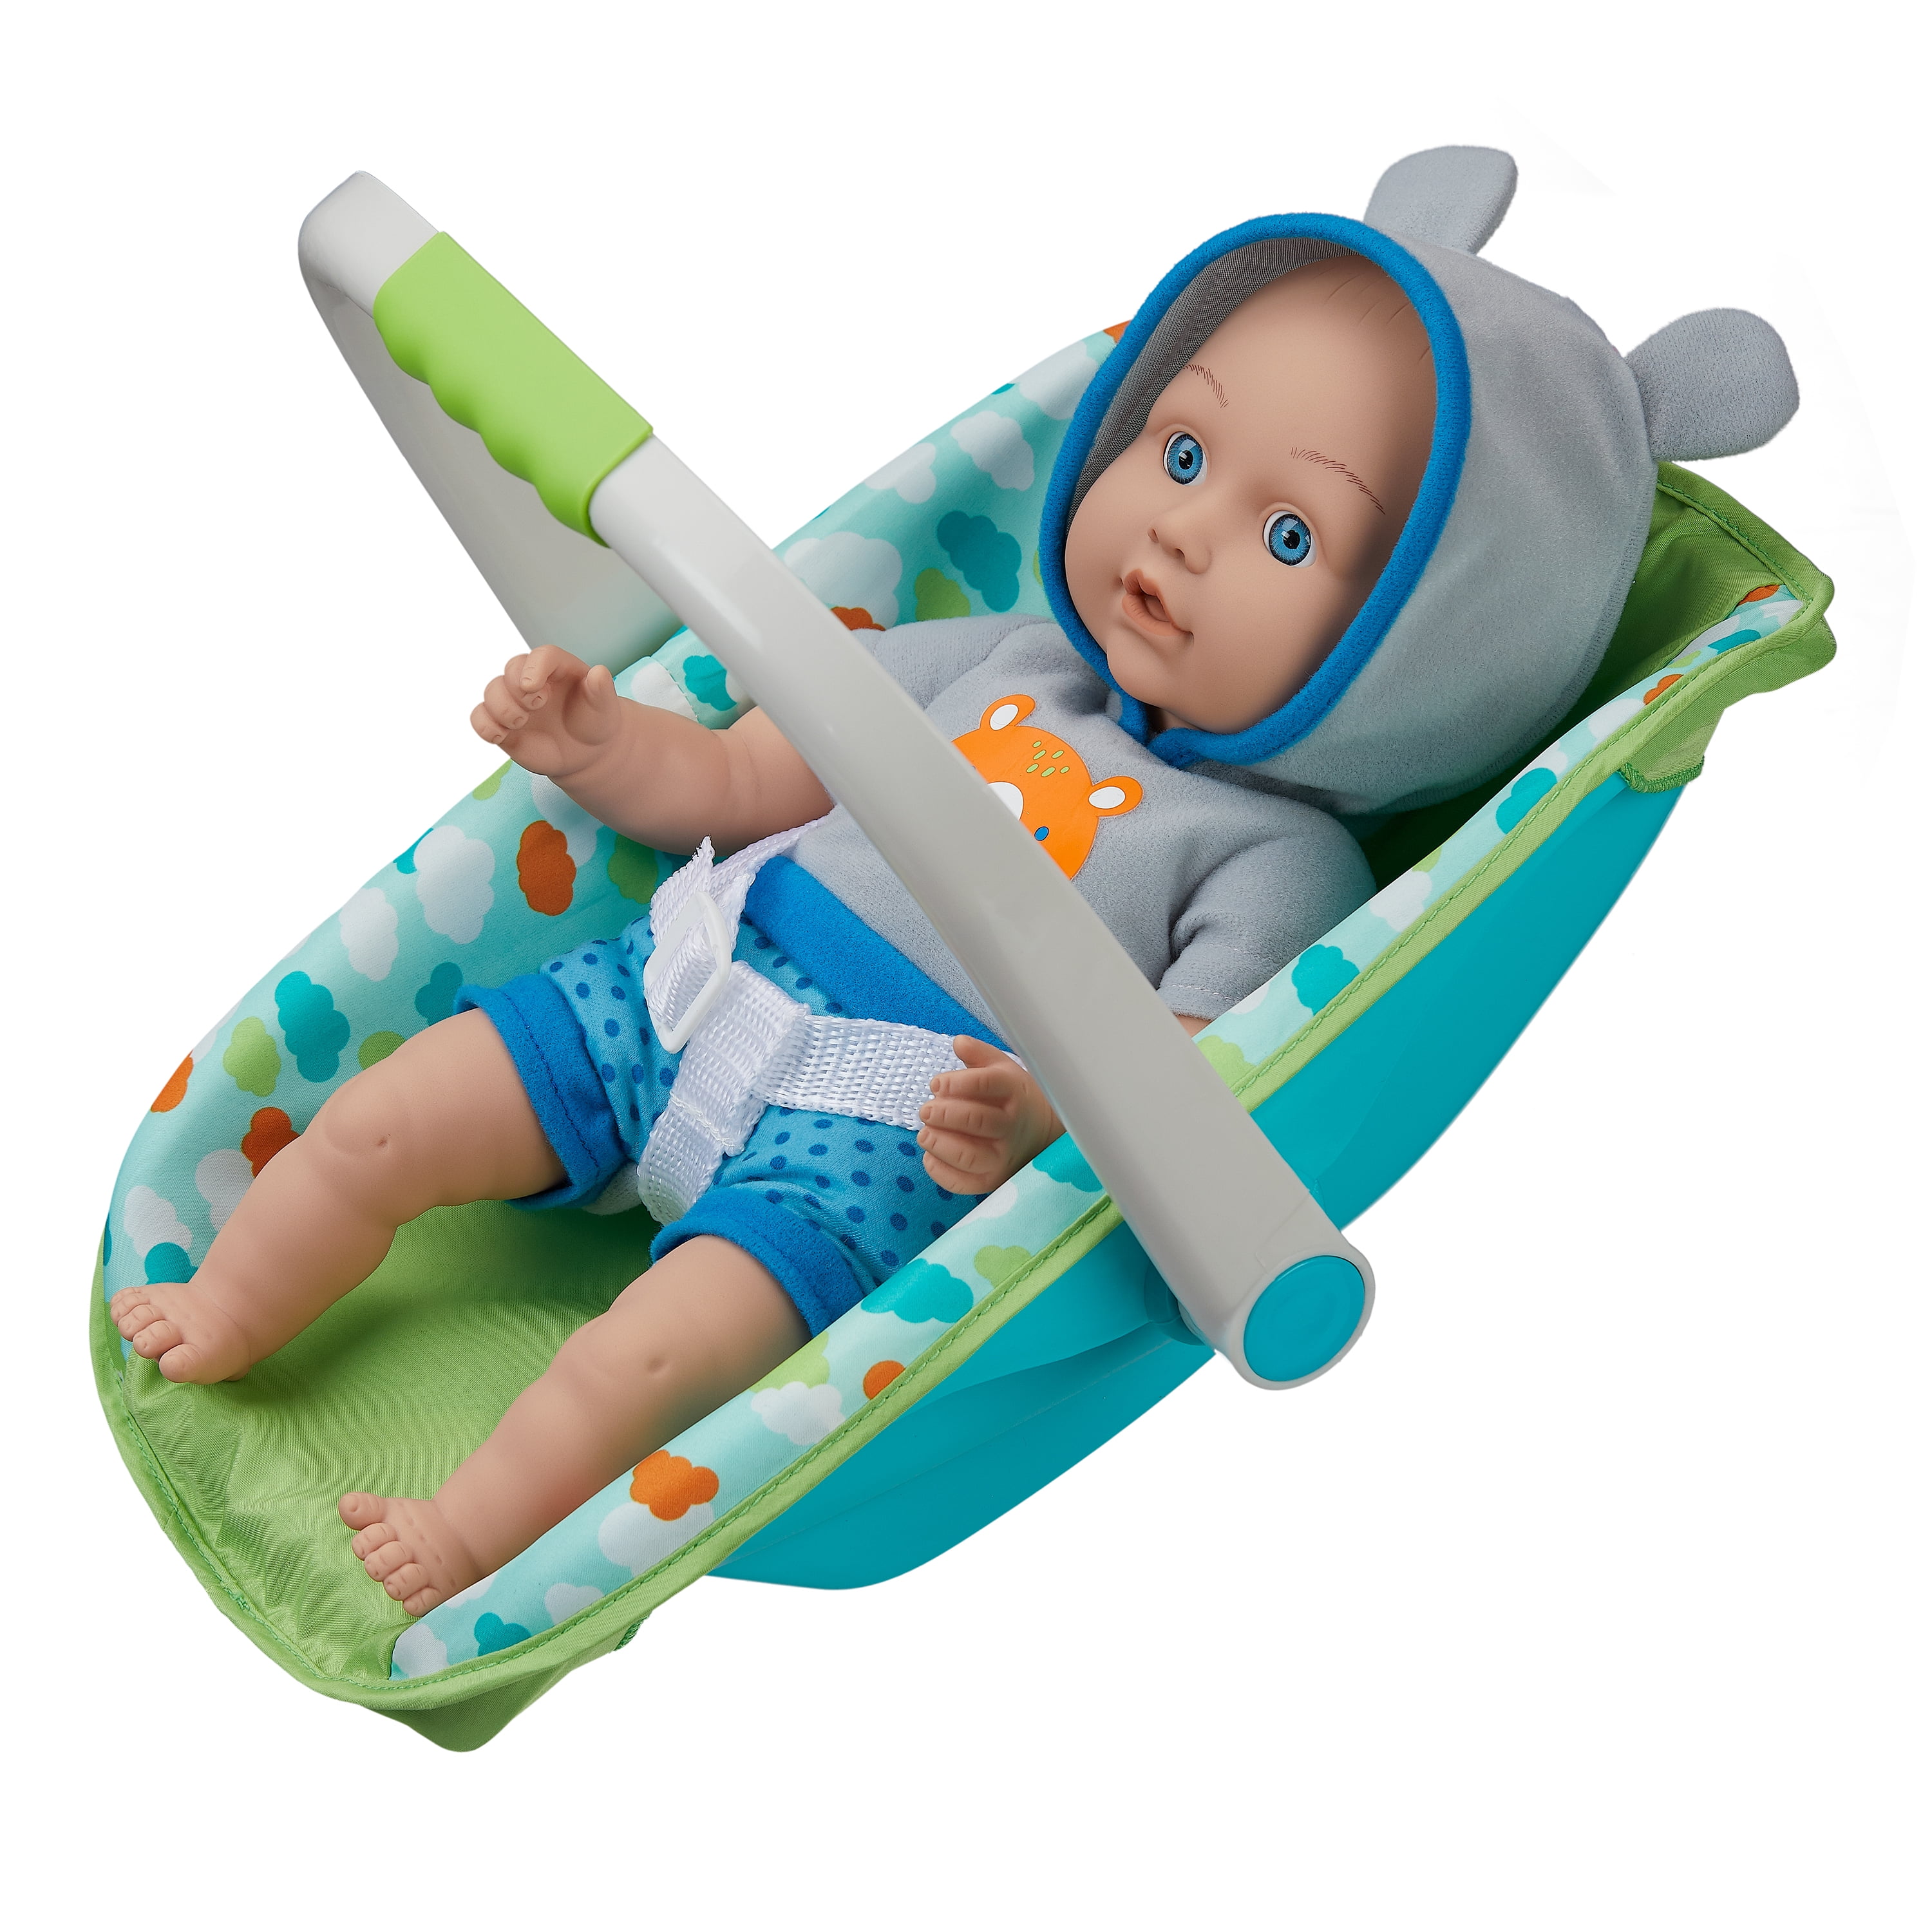 Your baby is about to fall in love with his new toy 